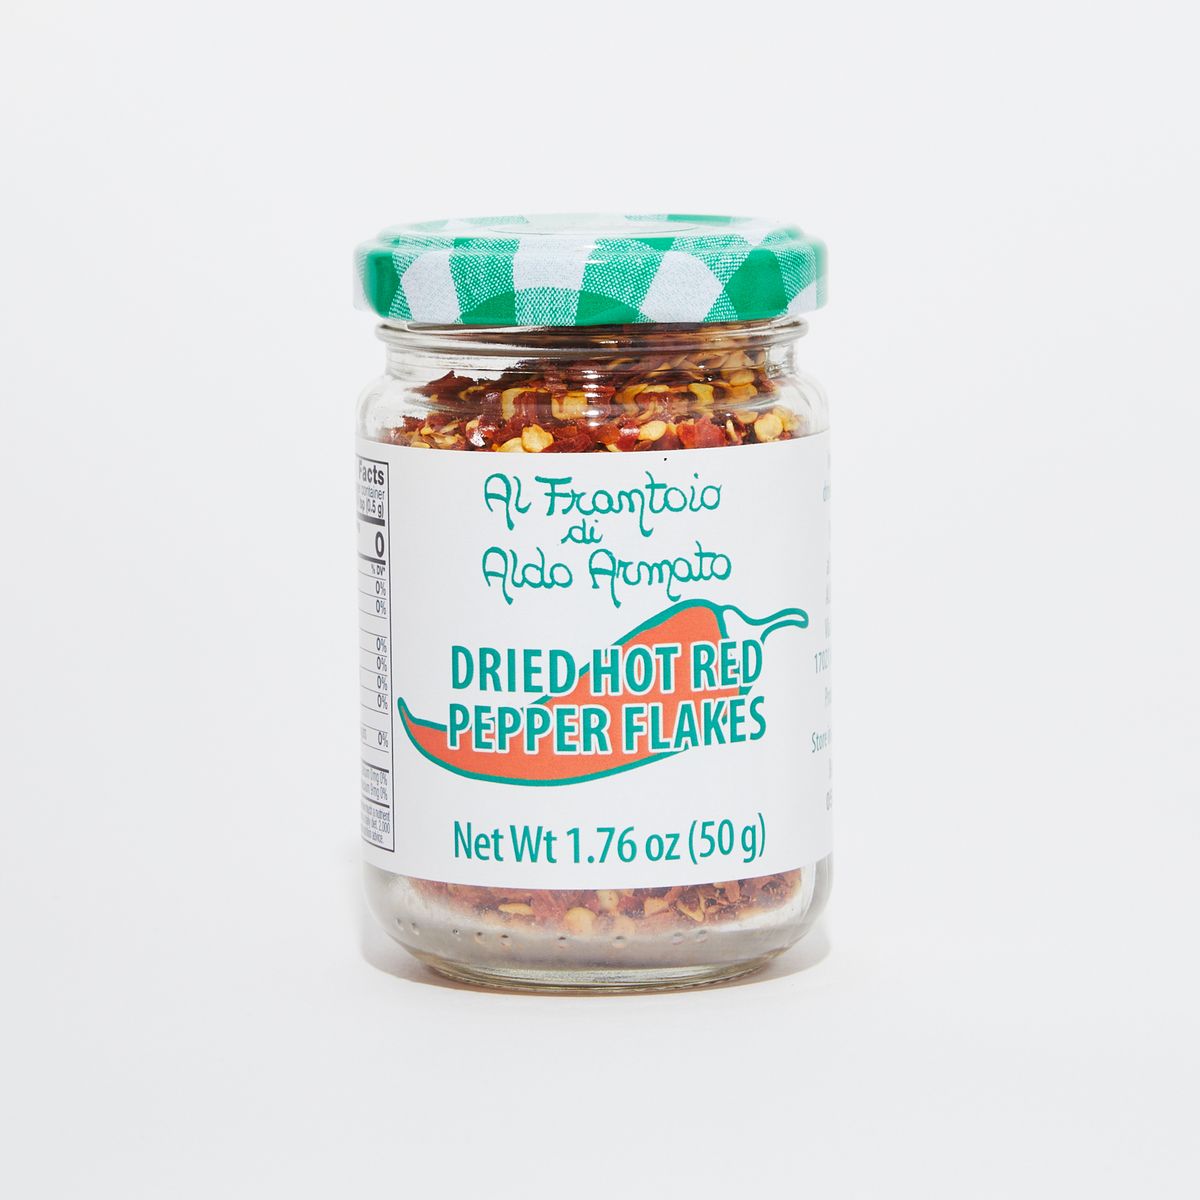 Clear glass jar full of red pepper flakes with a green and white gingham lid and a white label that reads "Dried Hot Red Pepper Flakes" in green lettering